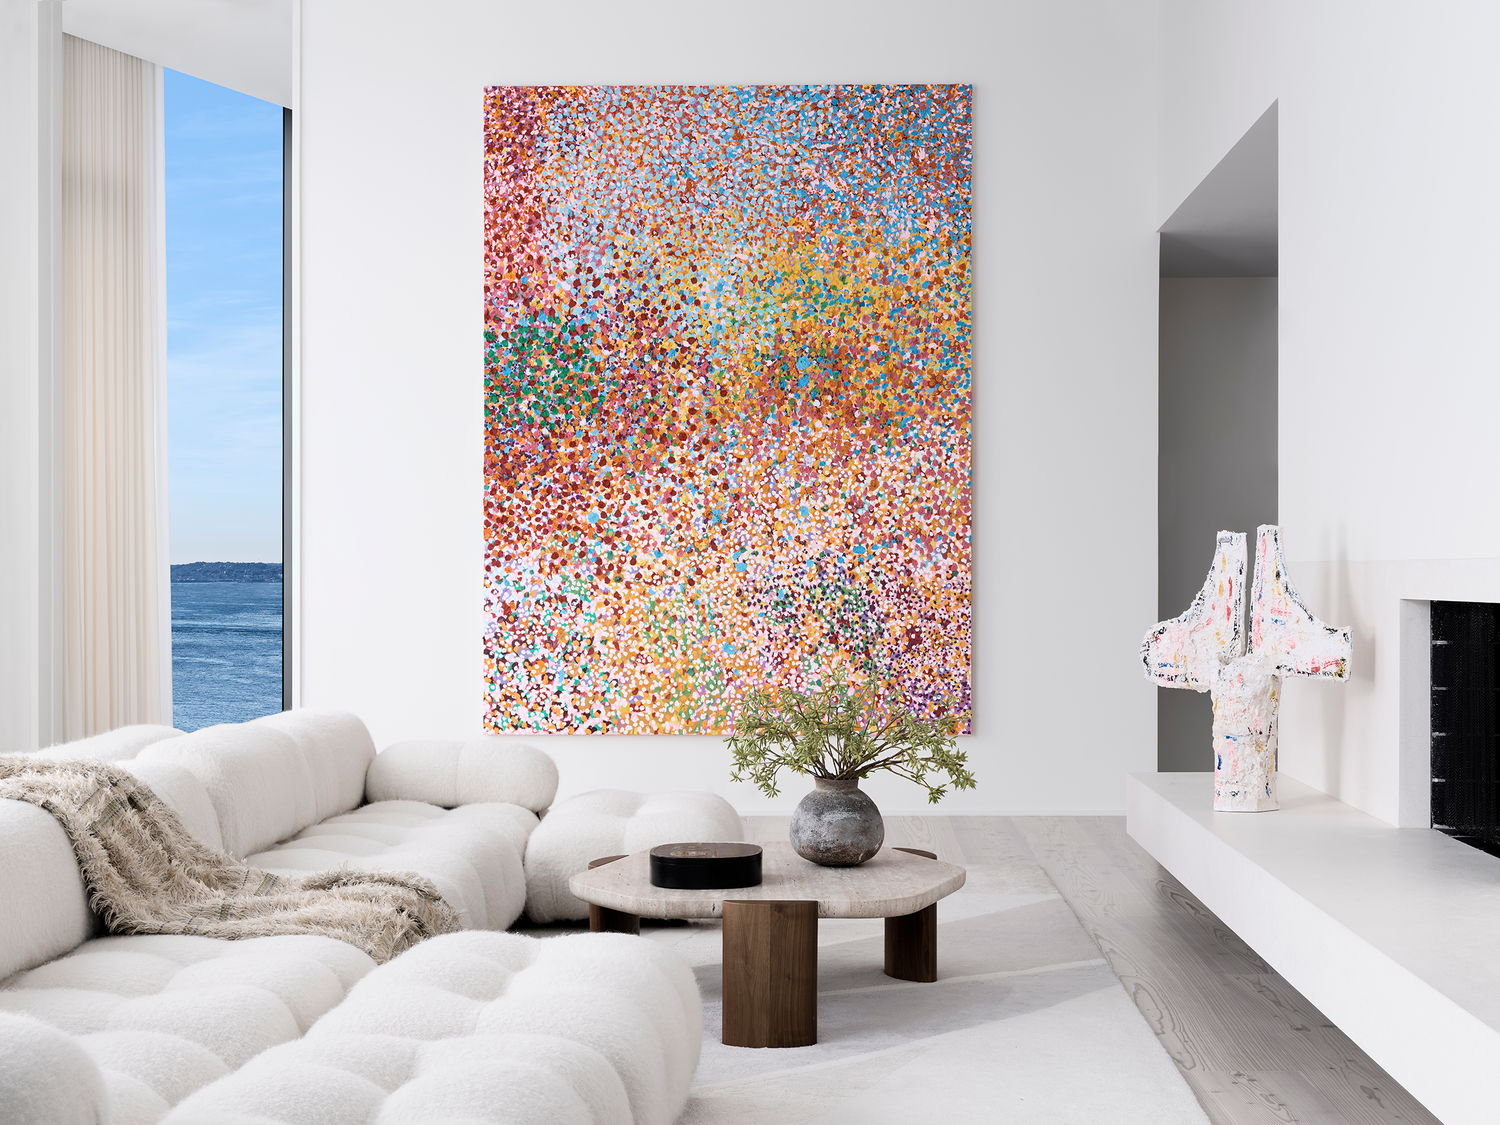 Veil of Love Everlasting by Hirst in a modern living room